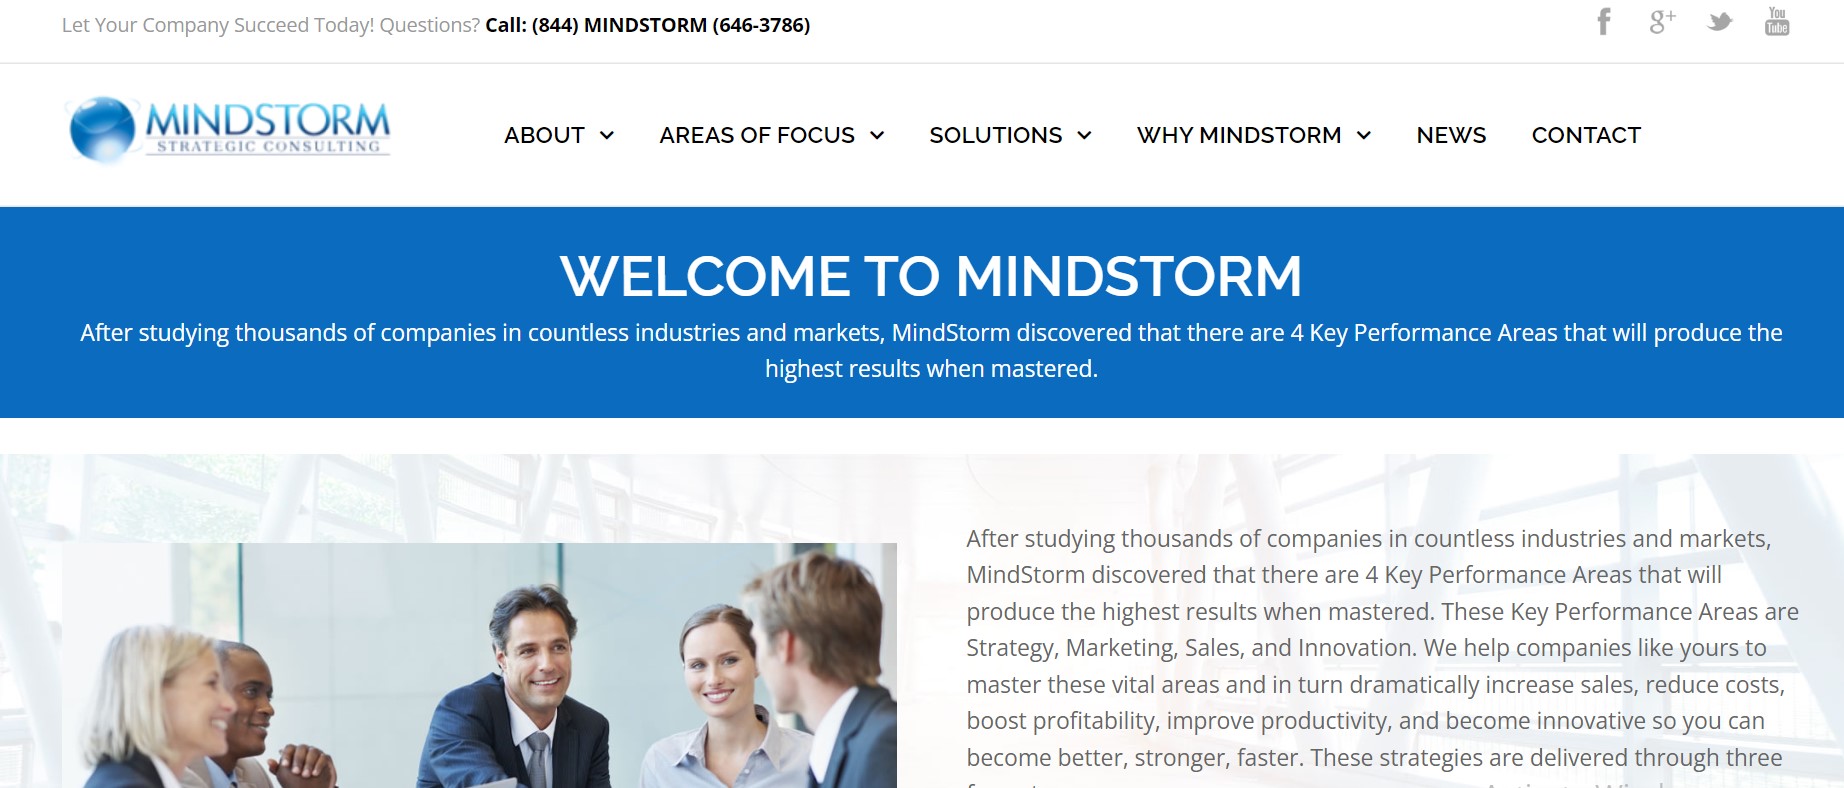 Mindstorm Strategic Counsulting